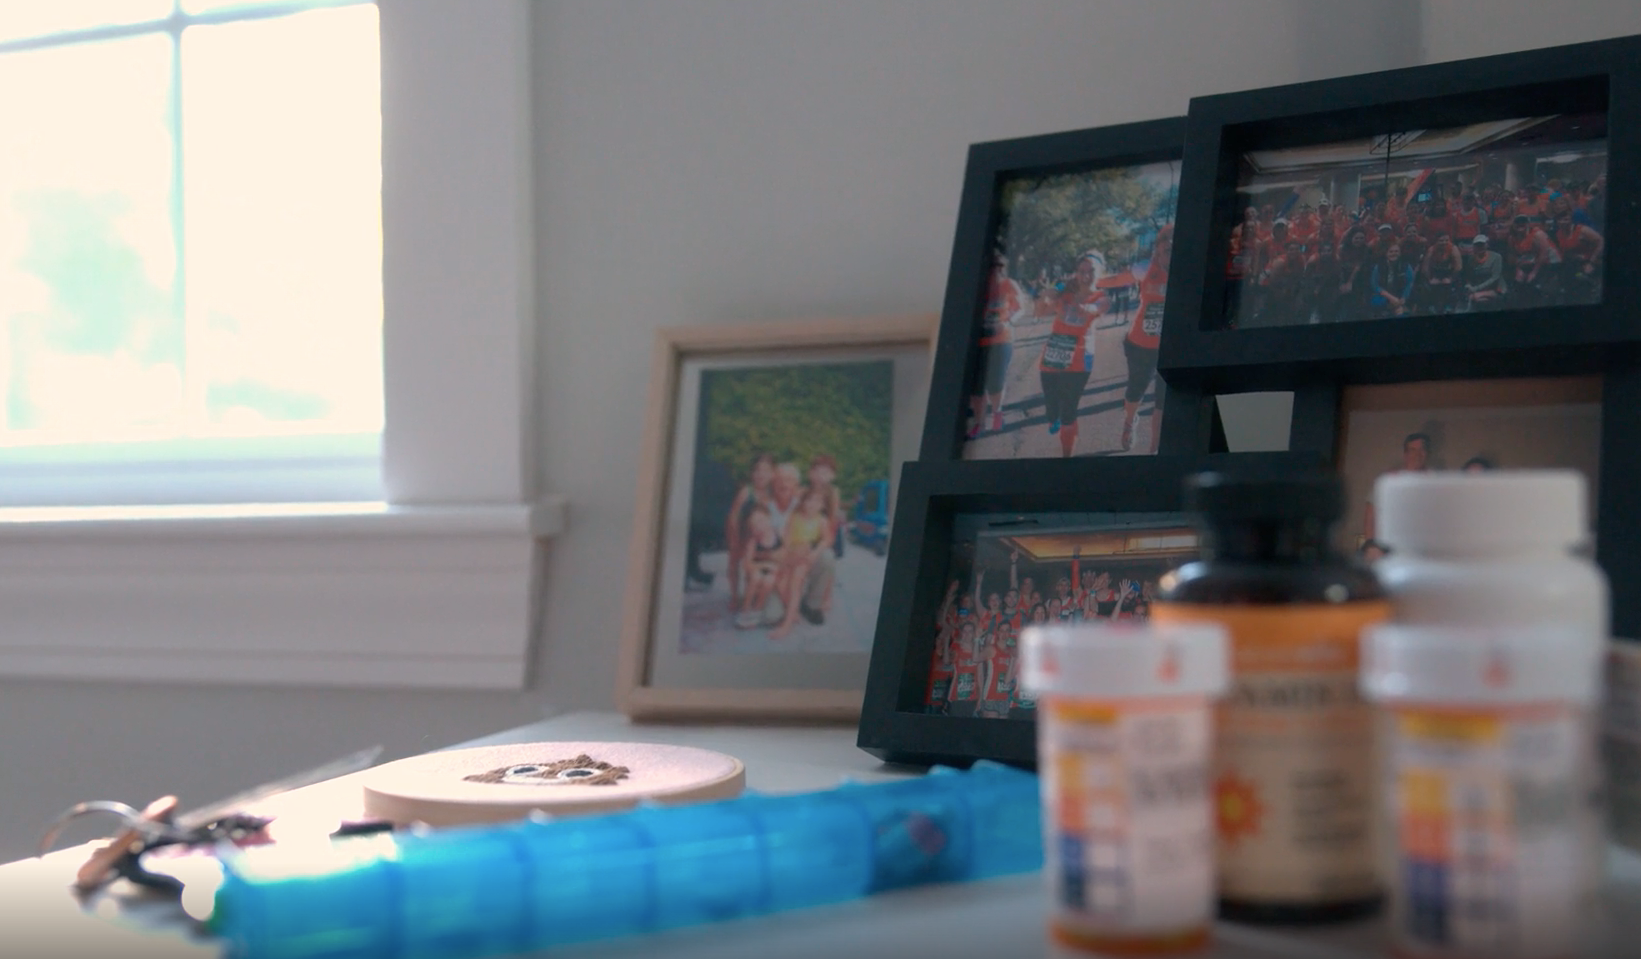 Pill bottles and a daily pill organizer sit in front of photographs.